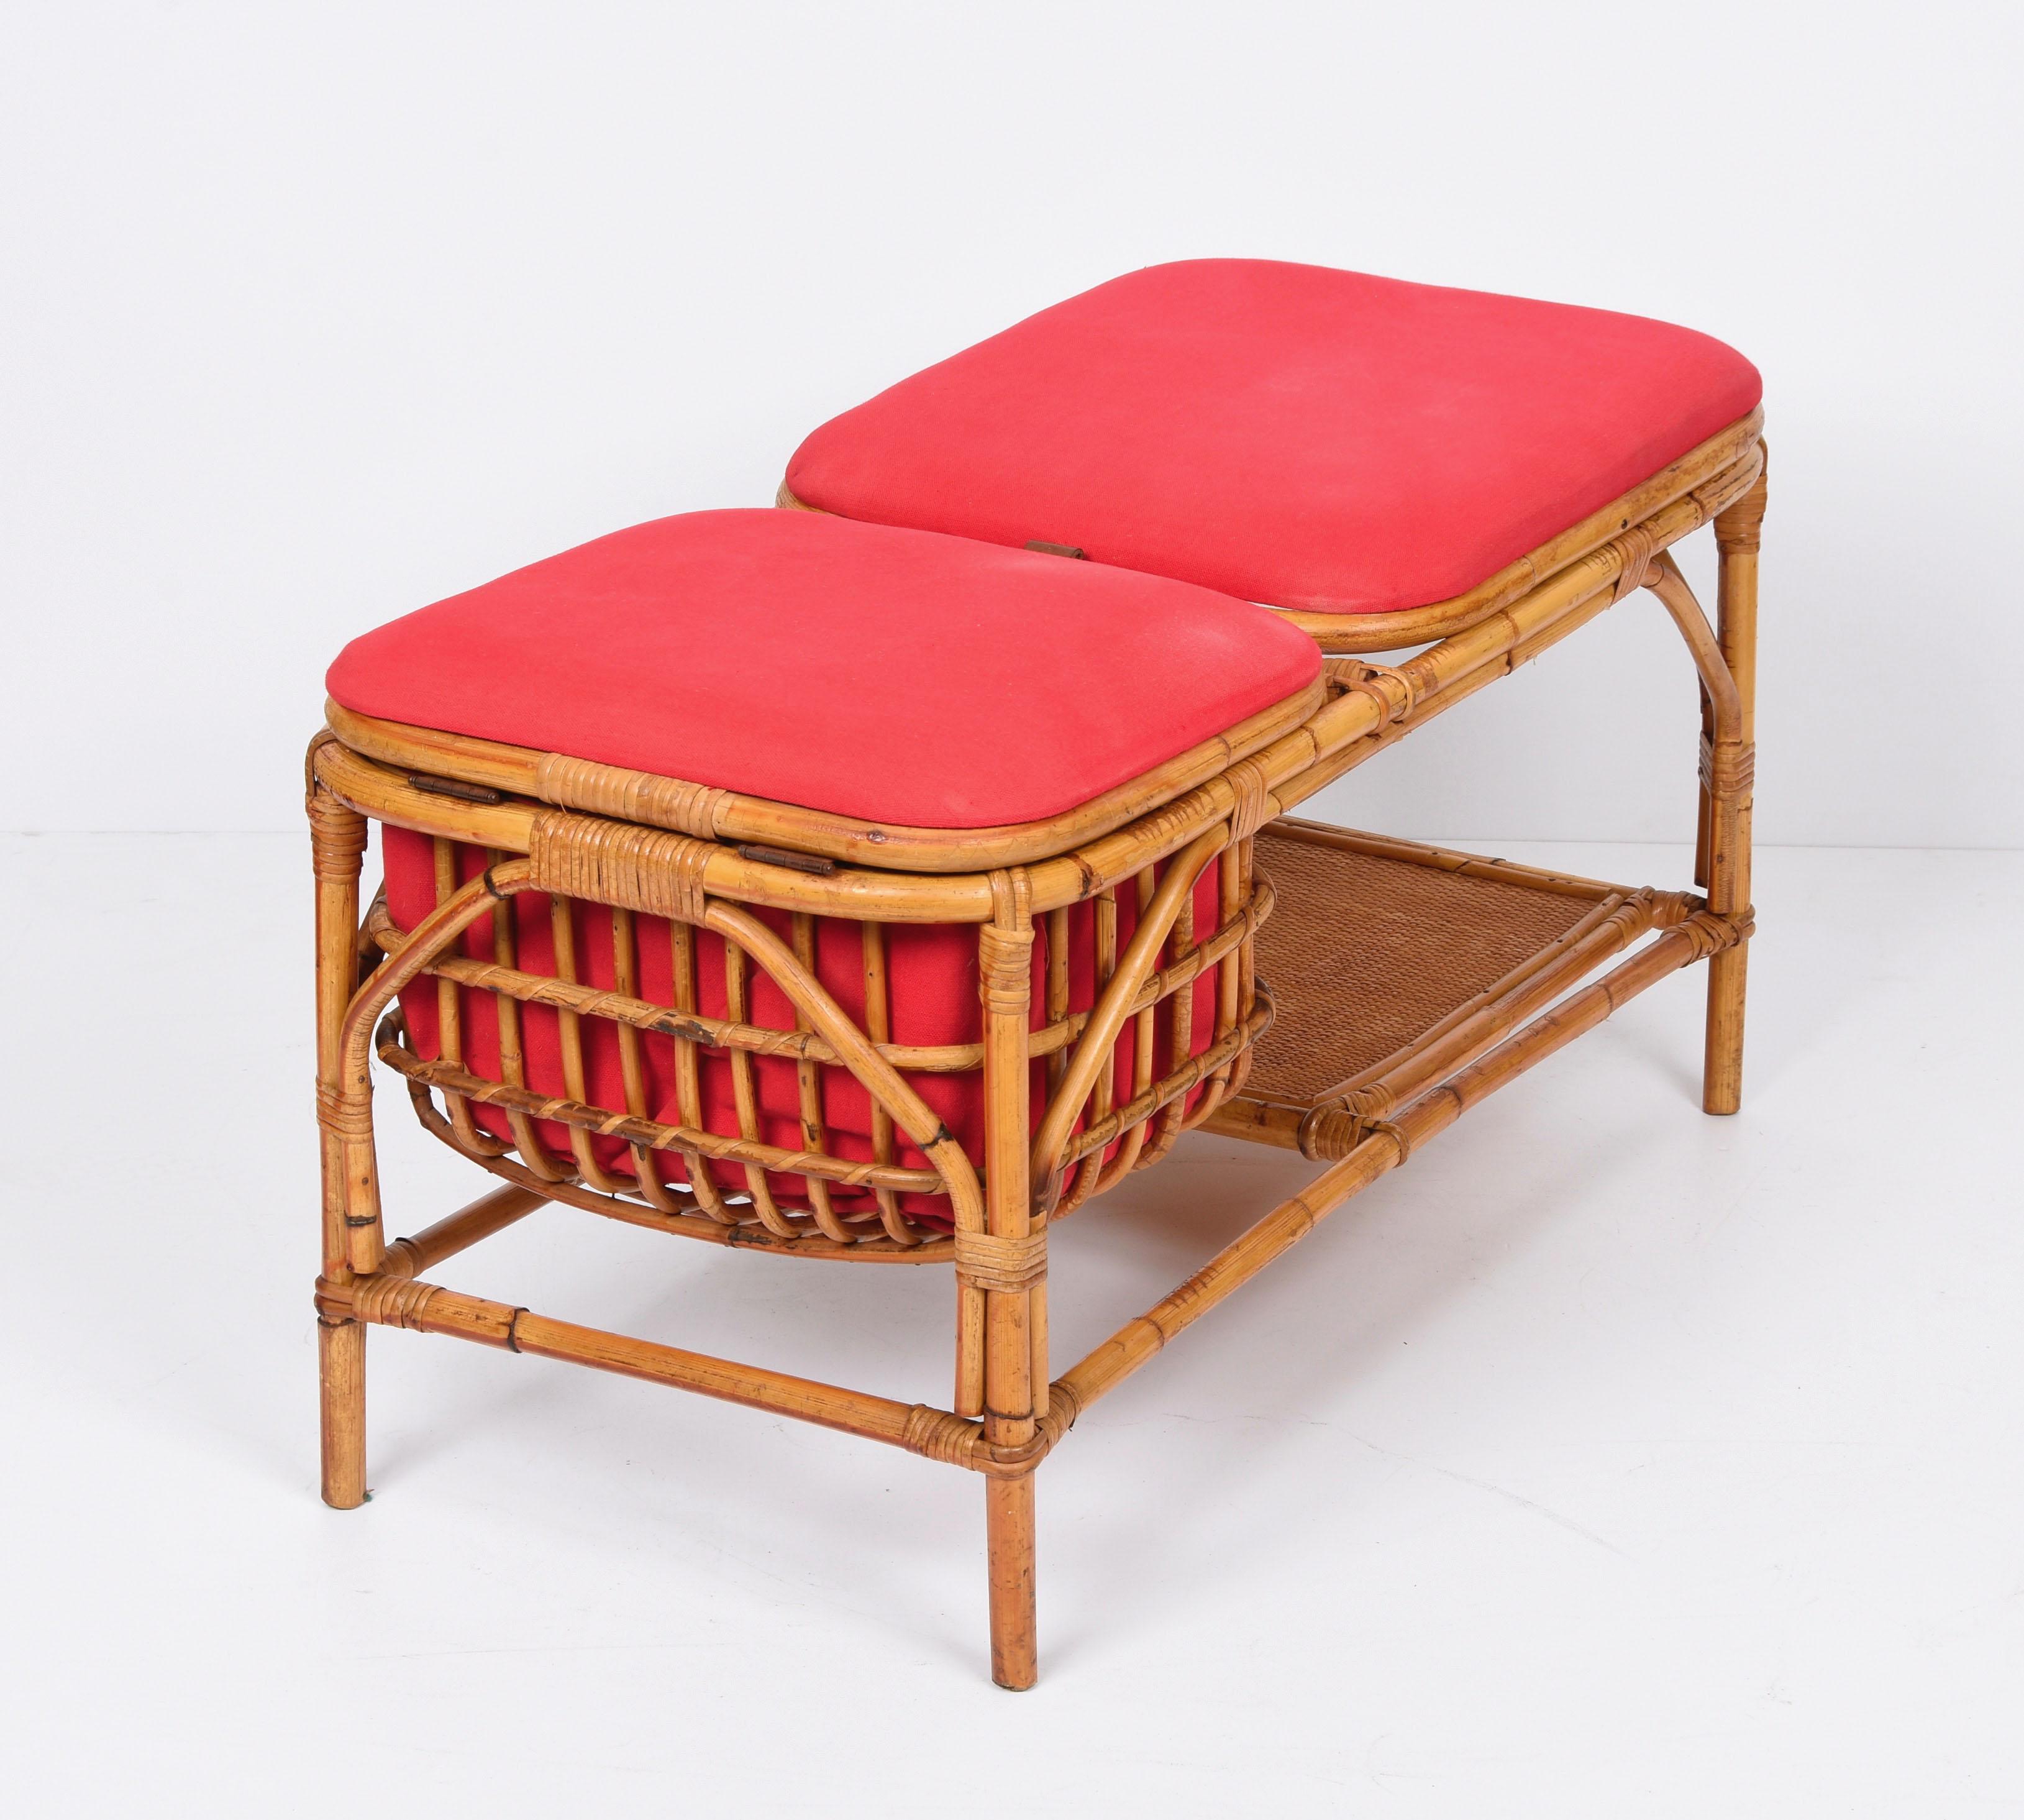 Mid-Century Modern Midcentury Bamboo and Rattan Italian Bench with Box Case, 1950s For Sale